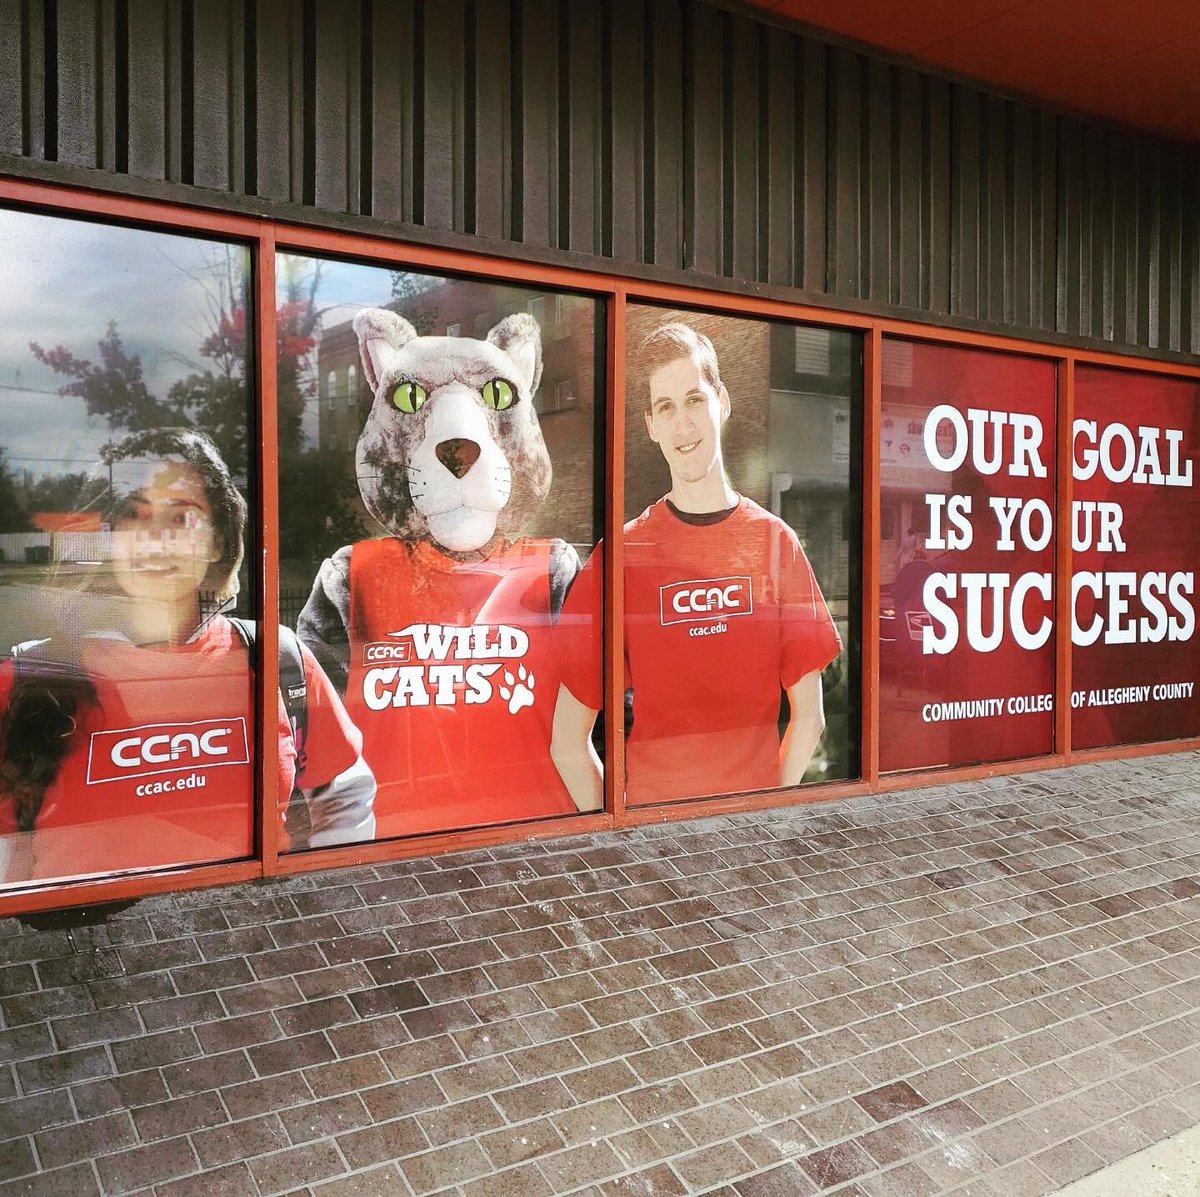 CCAC in Homewood is done! Come check out our perforated vinyl and enroll in some classes! #BackToSchool #fastsignsdidit #fastsigns207 #perforatedvinyl #design #print #stick #ccac